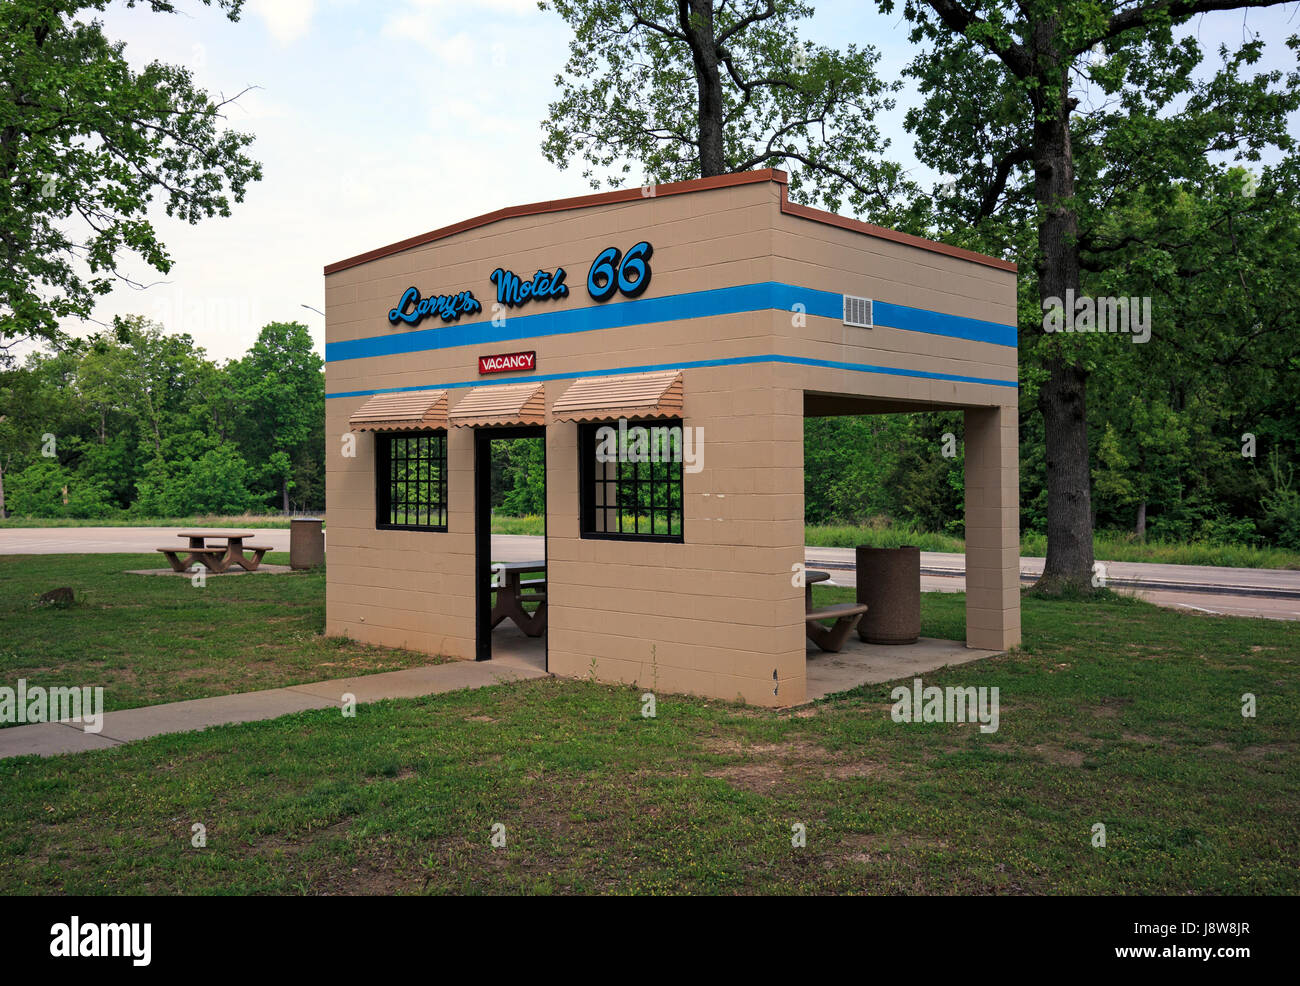 Picnic bench shelter in the shape of a market you might see along Route 66 in Missouri Stock Photo